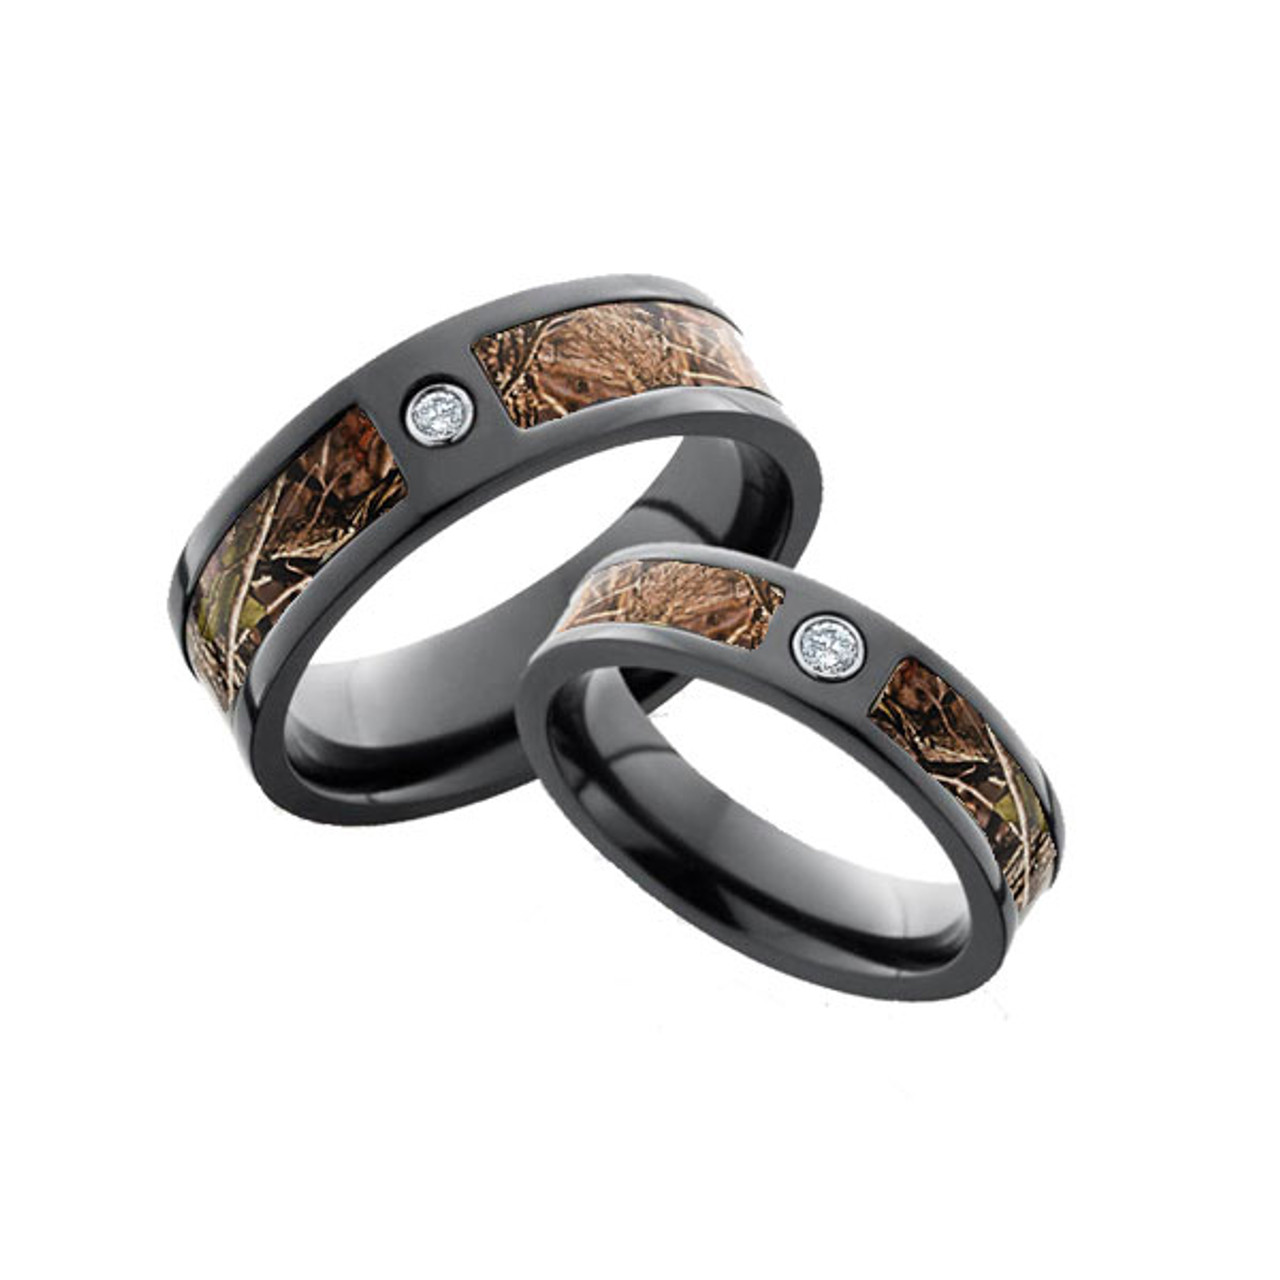 Mossy Oak Duckblind Men's Camo 8mm Stainless Steel Wedding Band with  Polished Edges and Deluxe Comfort Fit - Walmart.com